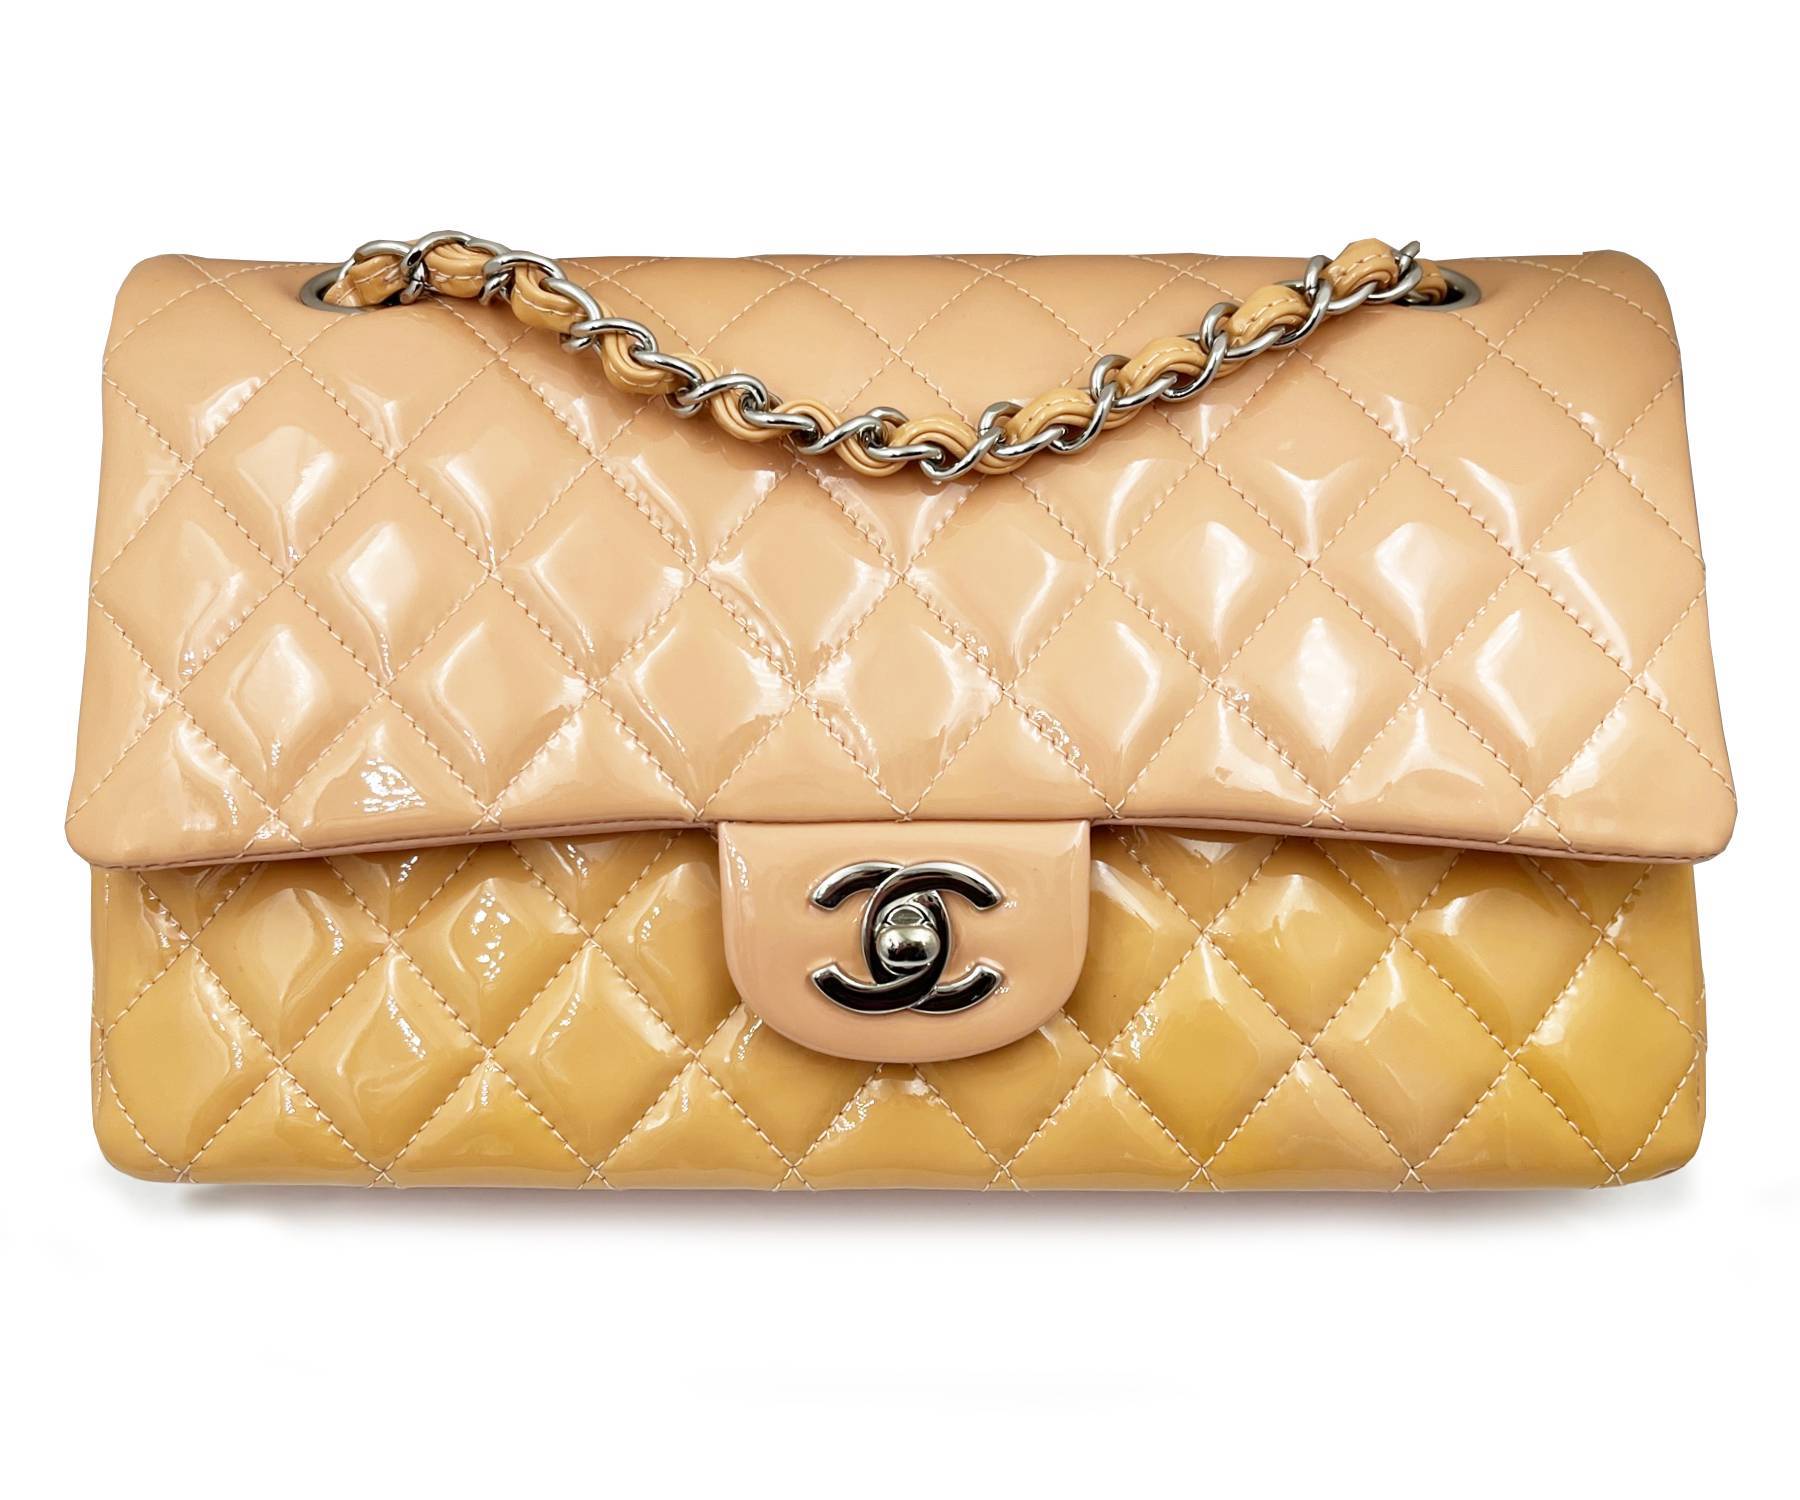 CHANEL Peach Pink Timeless Double Flap Patent Leather 10 Shoulder Bag